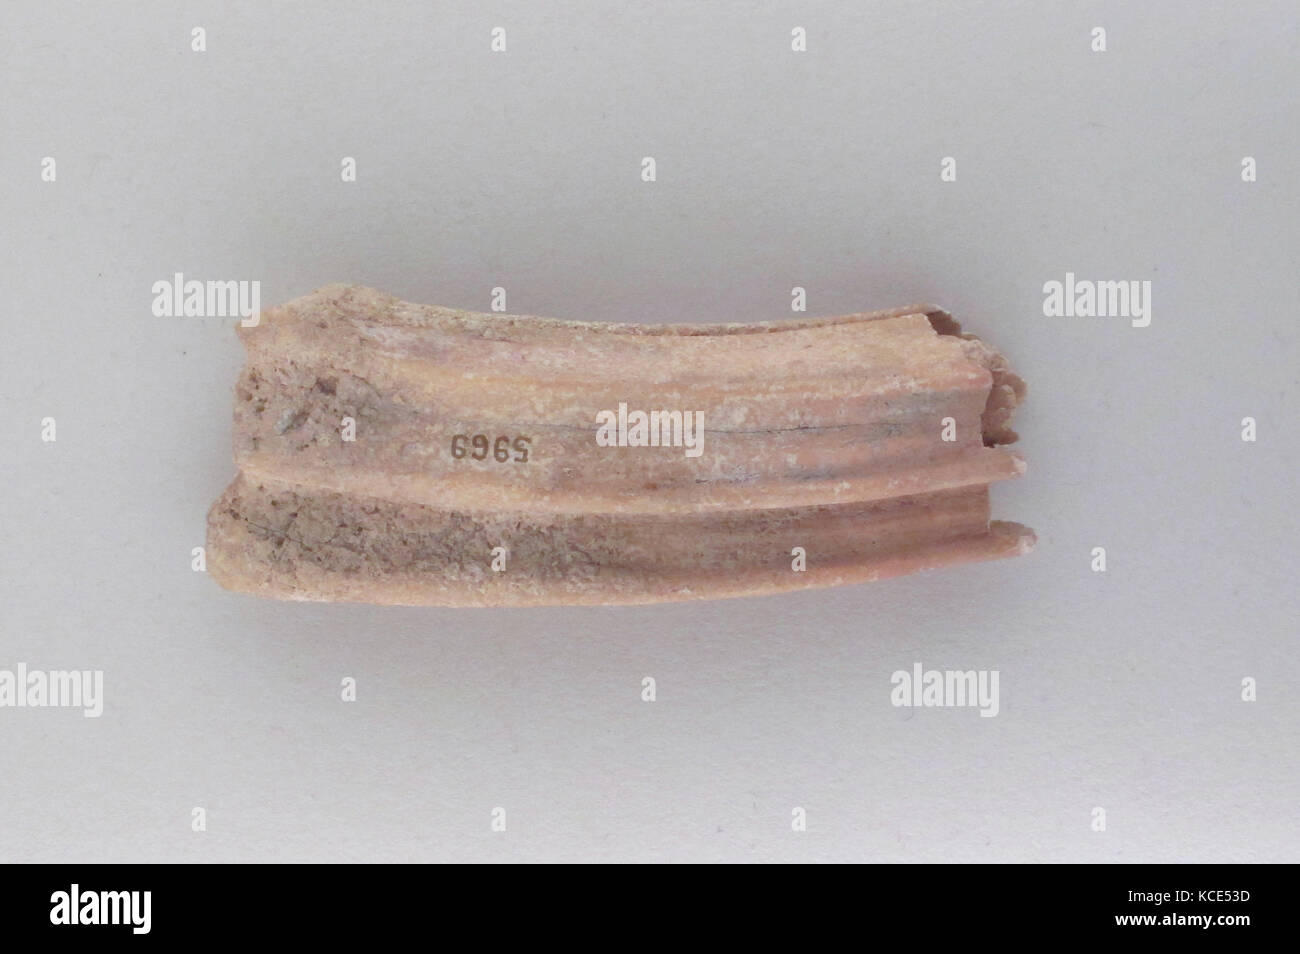 Tooth of an ox, Cypriot, Bone, Other: 1 3/16 x 3 3/8 x 7/8 in. (3 x 8.6 x 2.2 cm Stock Photo